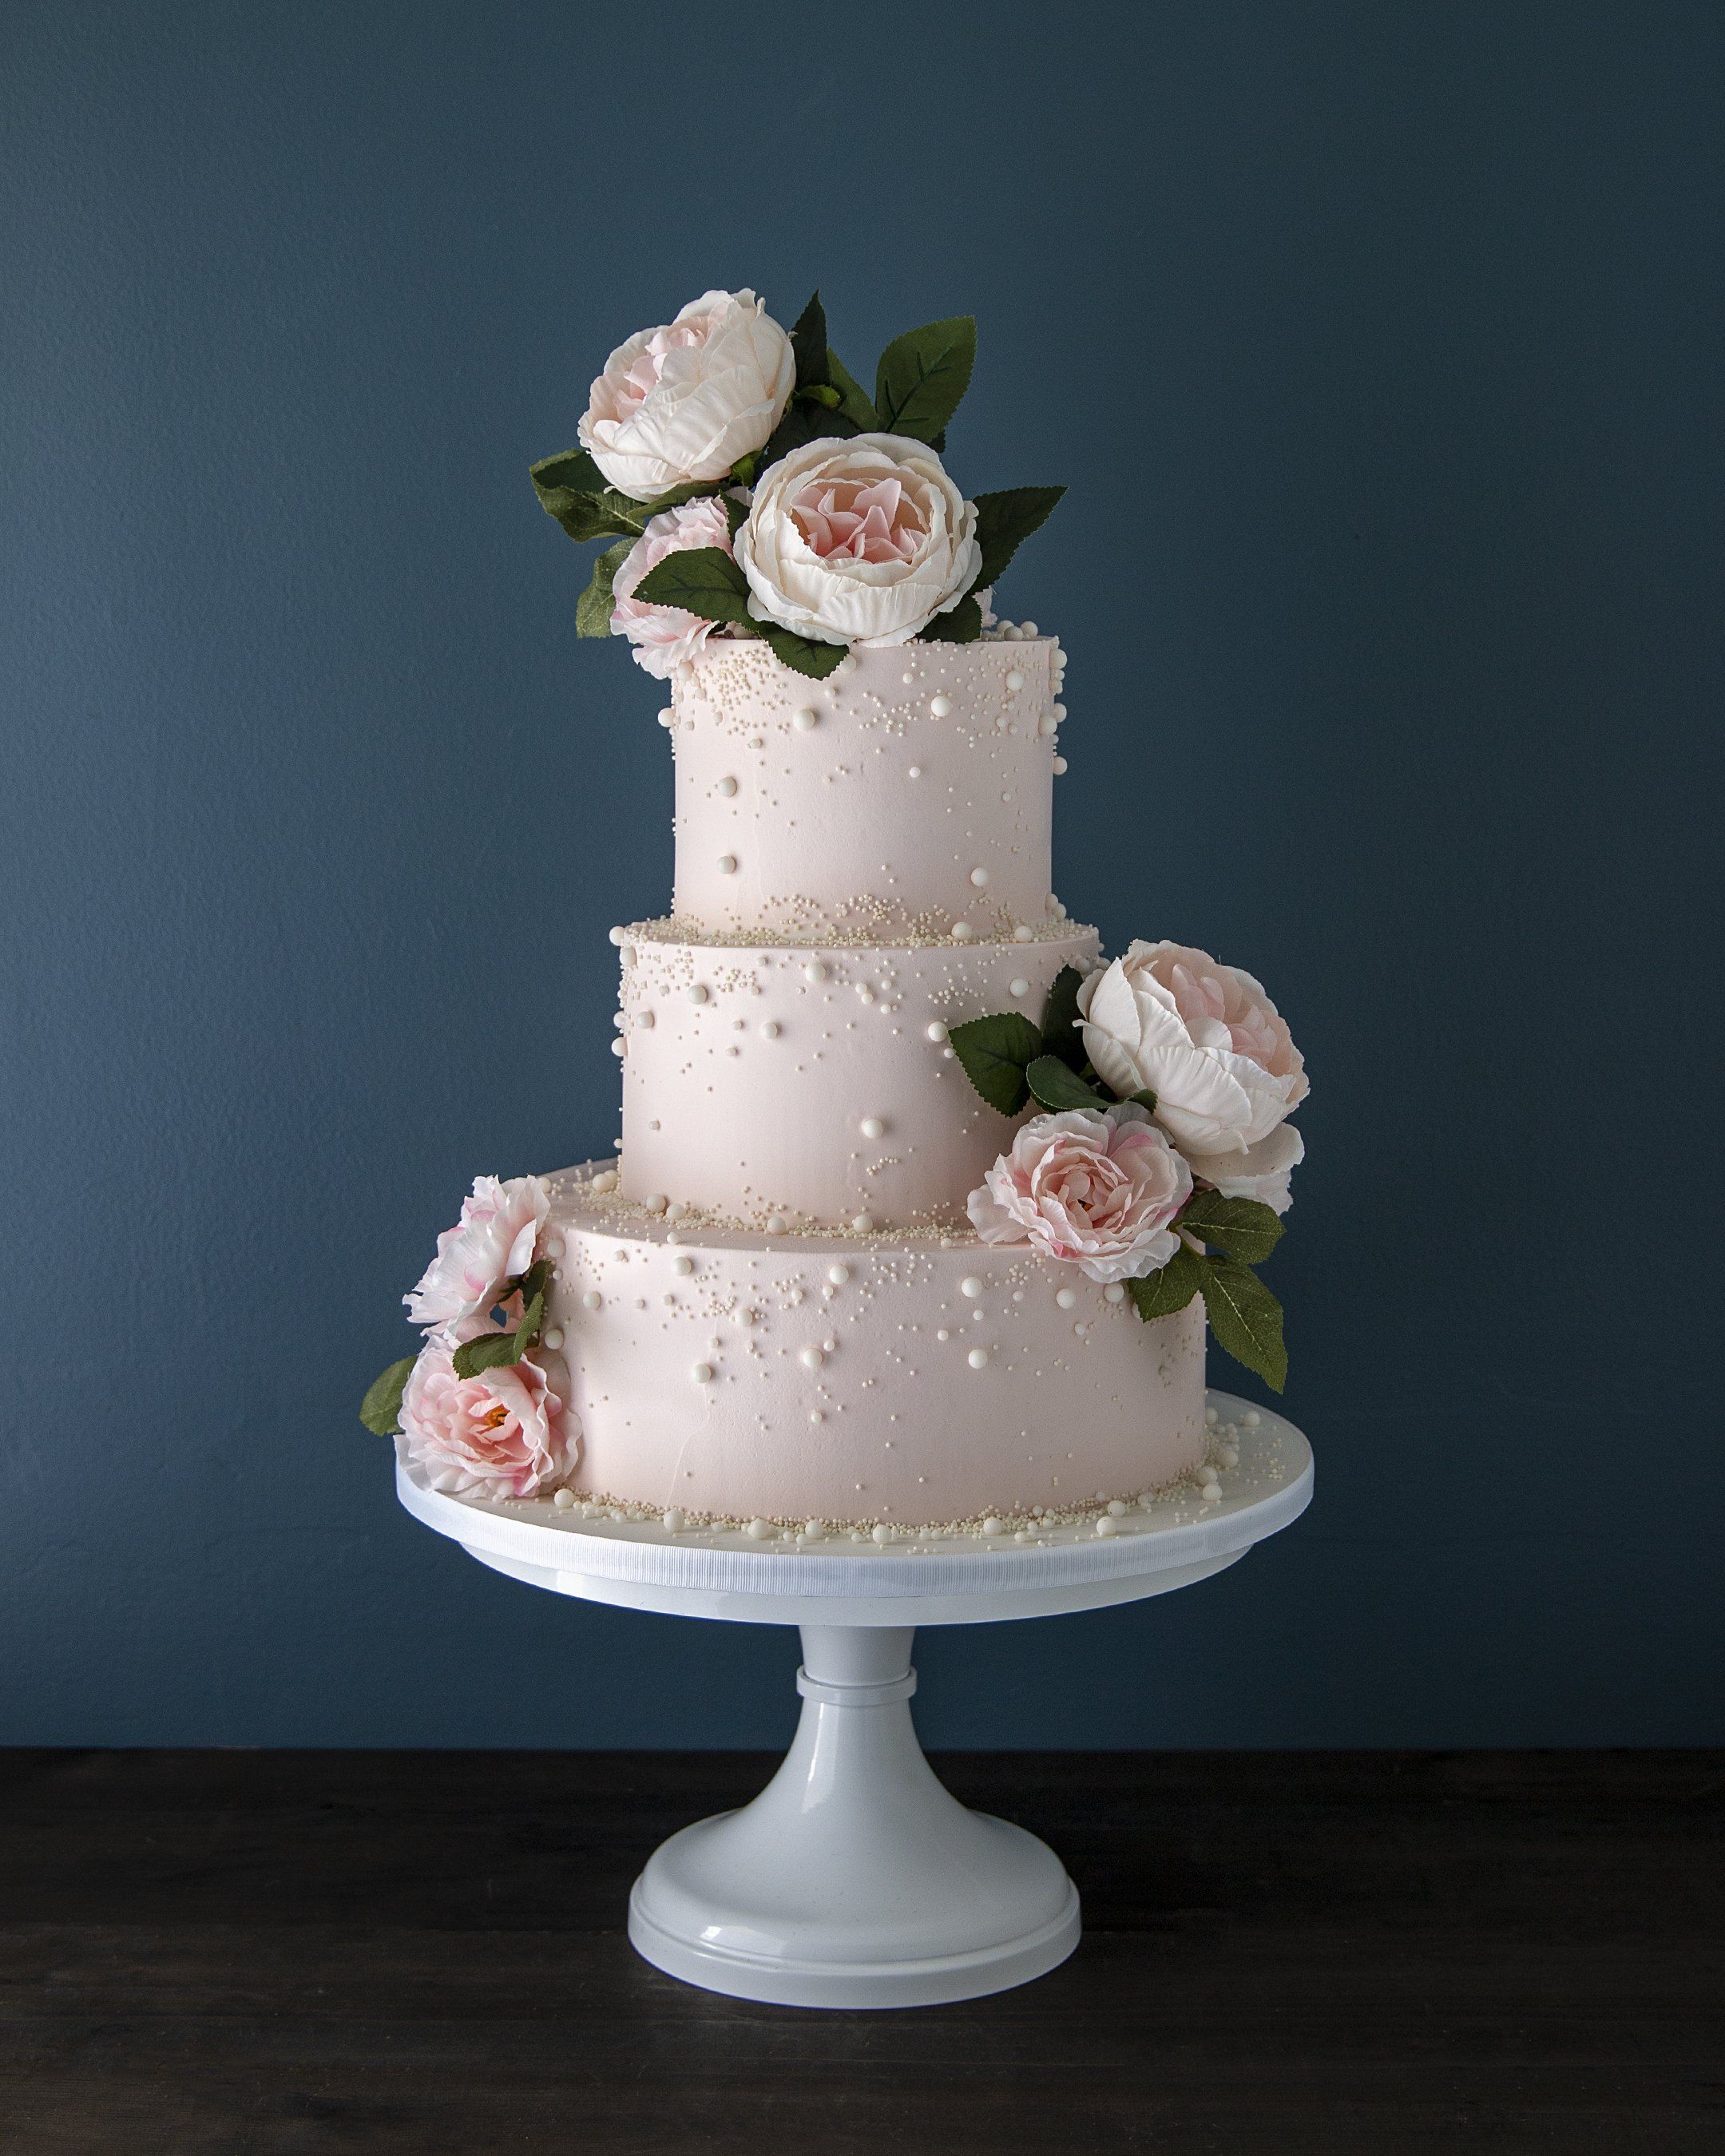 47 Buttercream Cake Ideas for Every Celebration : Your Honor…She Slayed